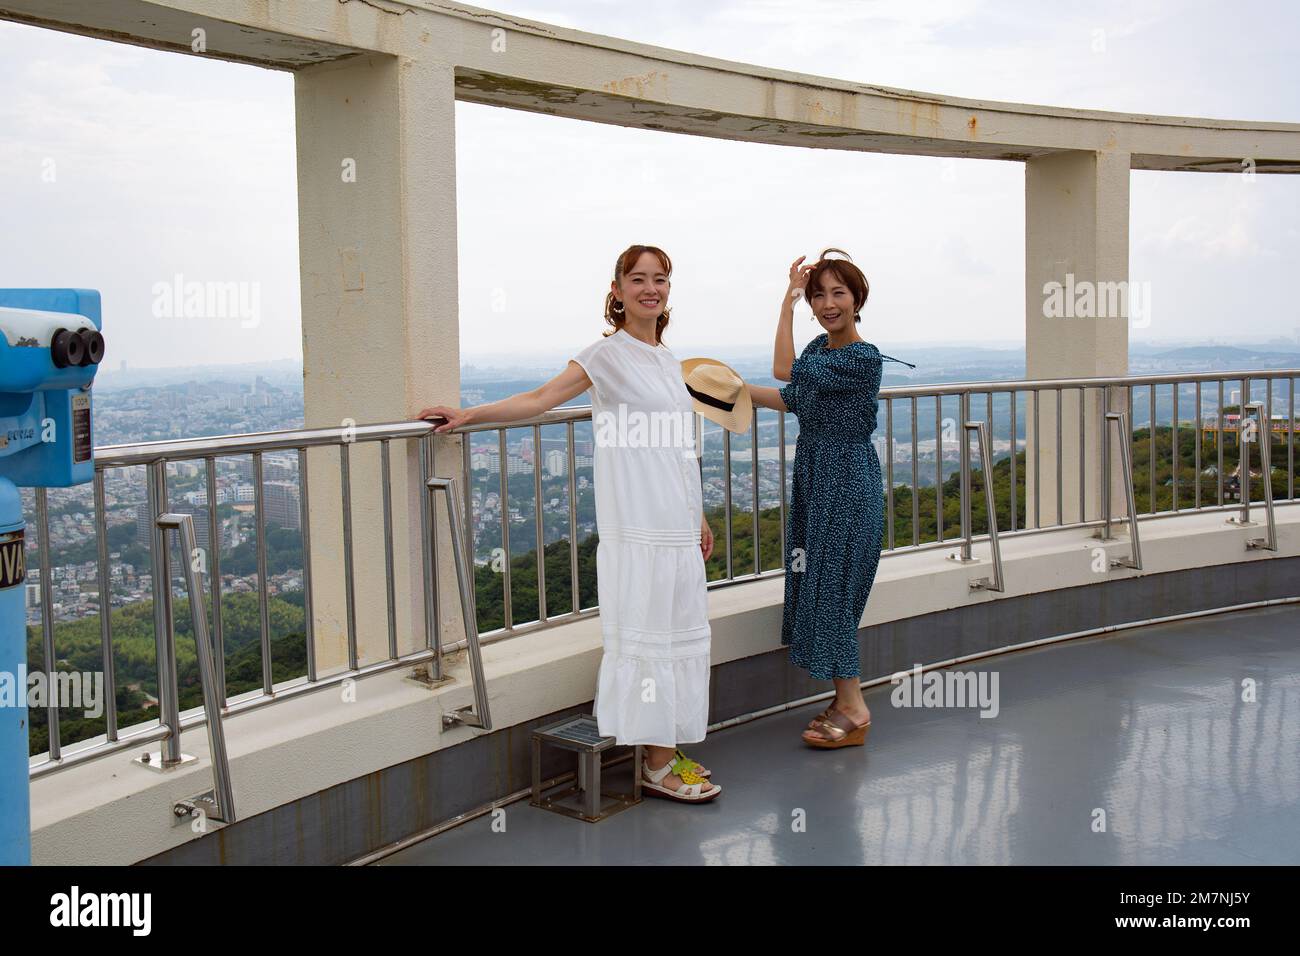 Two mature Japanese women at a viewing platform outdoors in summer, leaning on the rail. Stock Photo